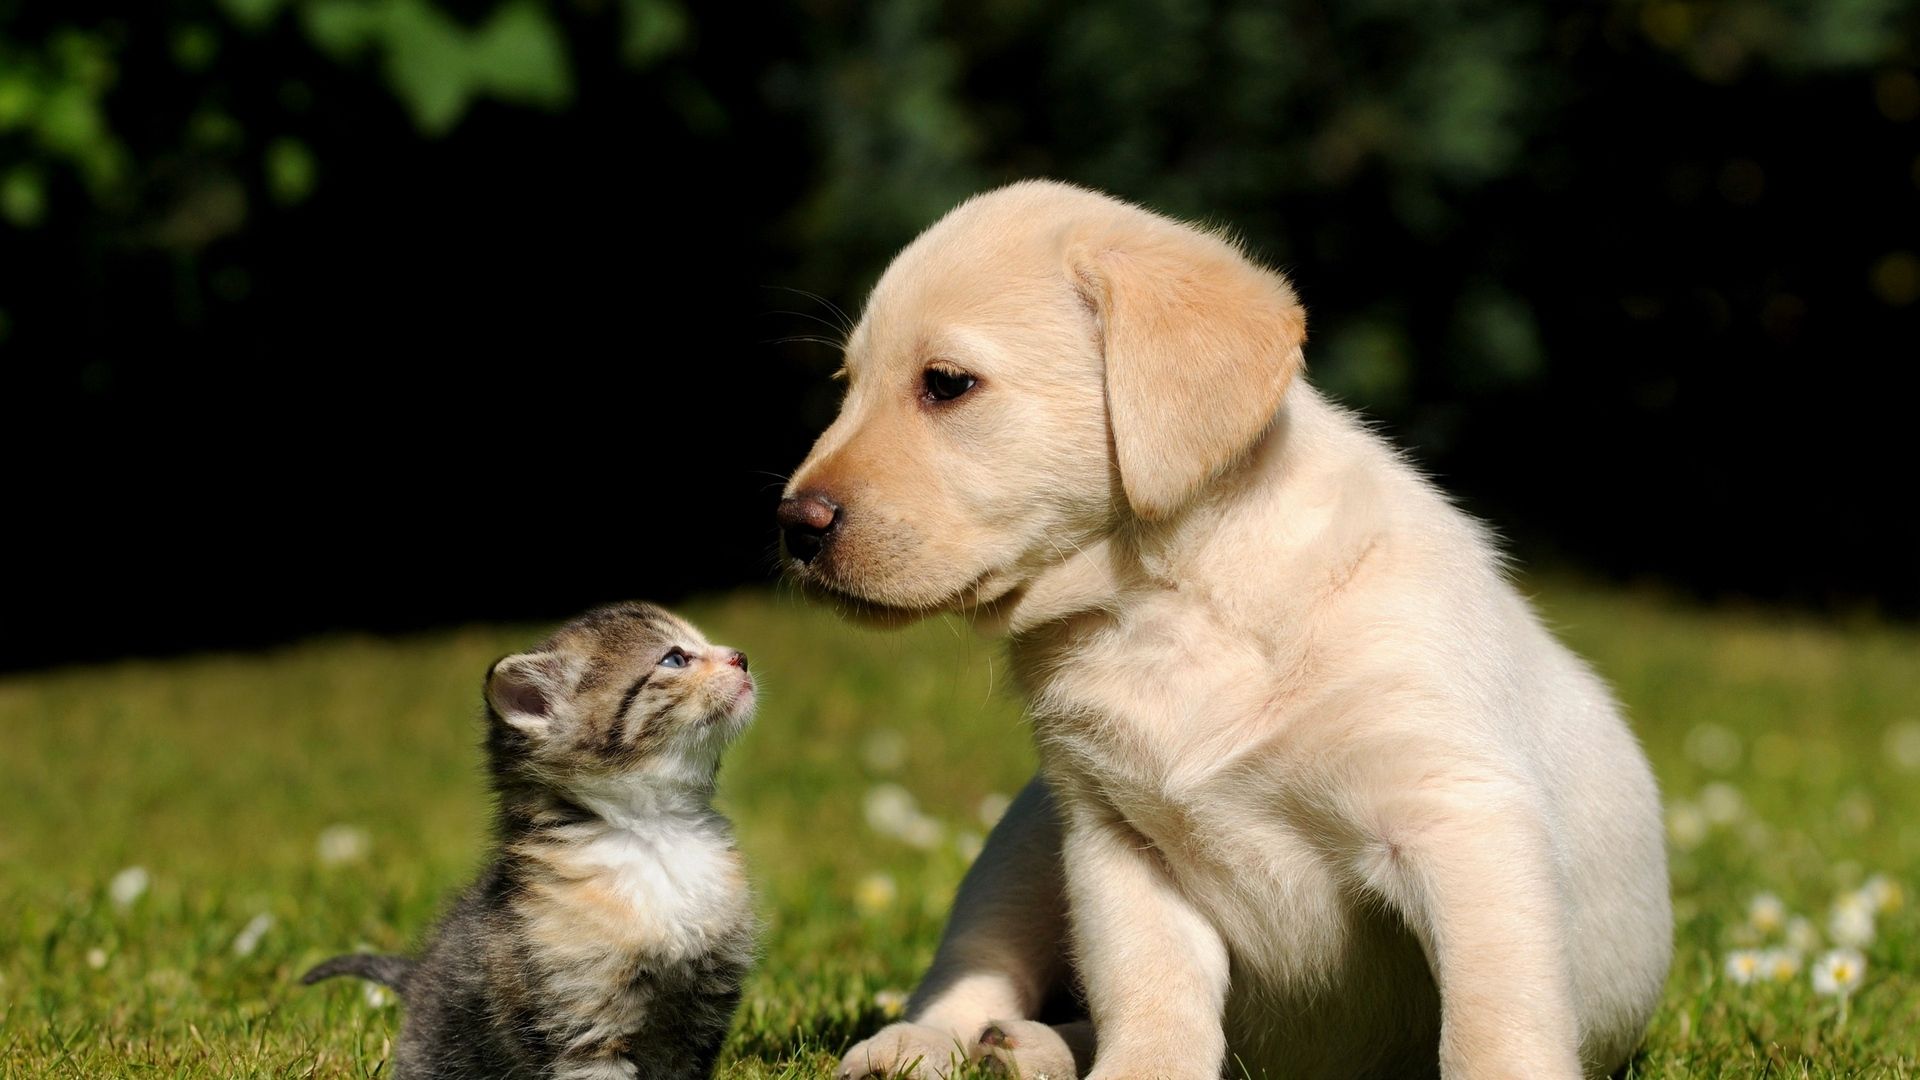 21 Puppy and Kitten Wallpapers